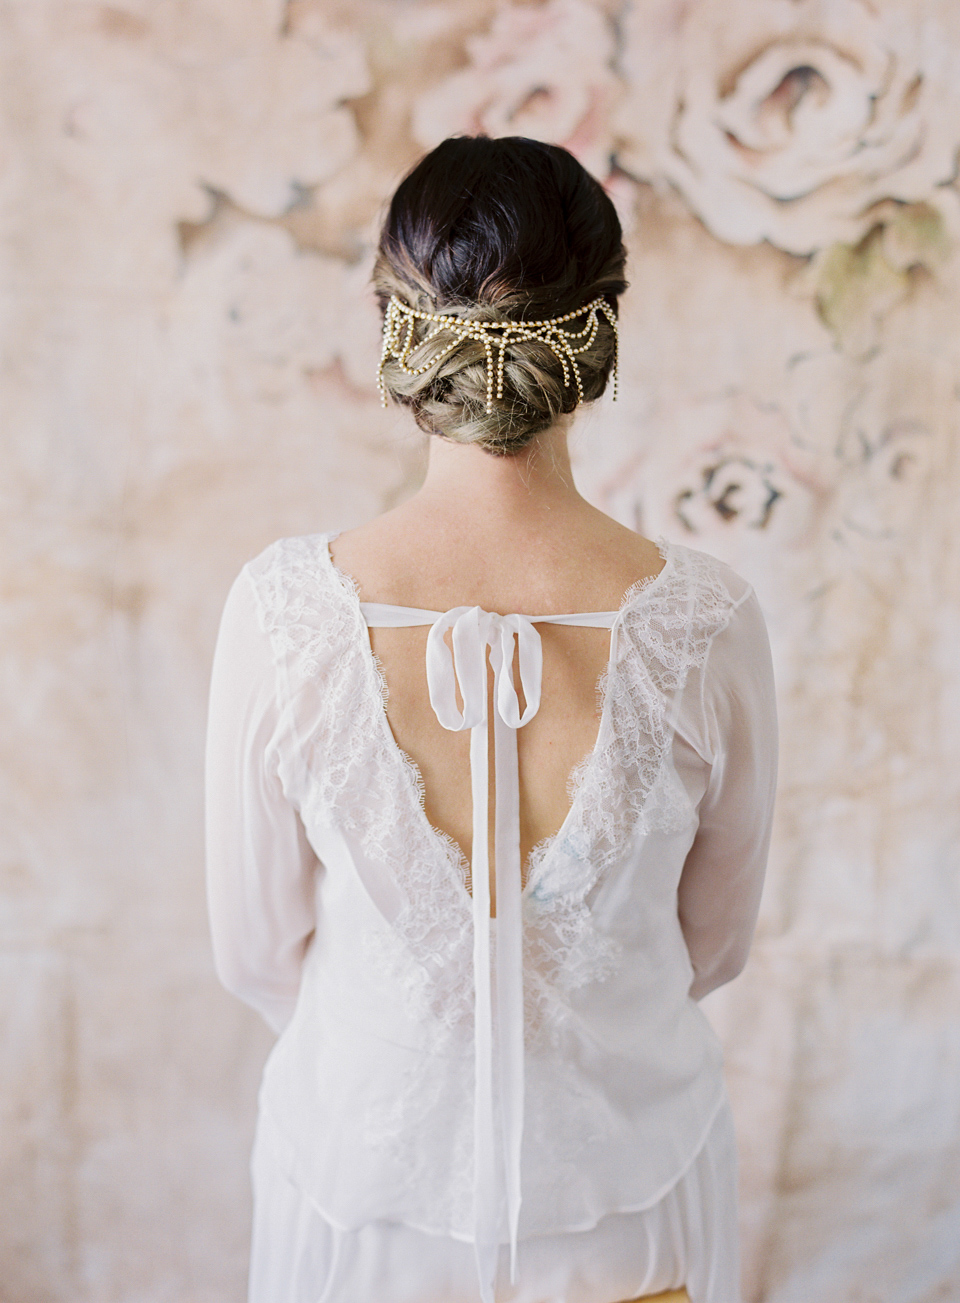 Unexpected Beauty - the new collection of bridal adornments from Danani.